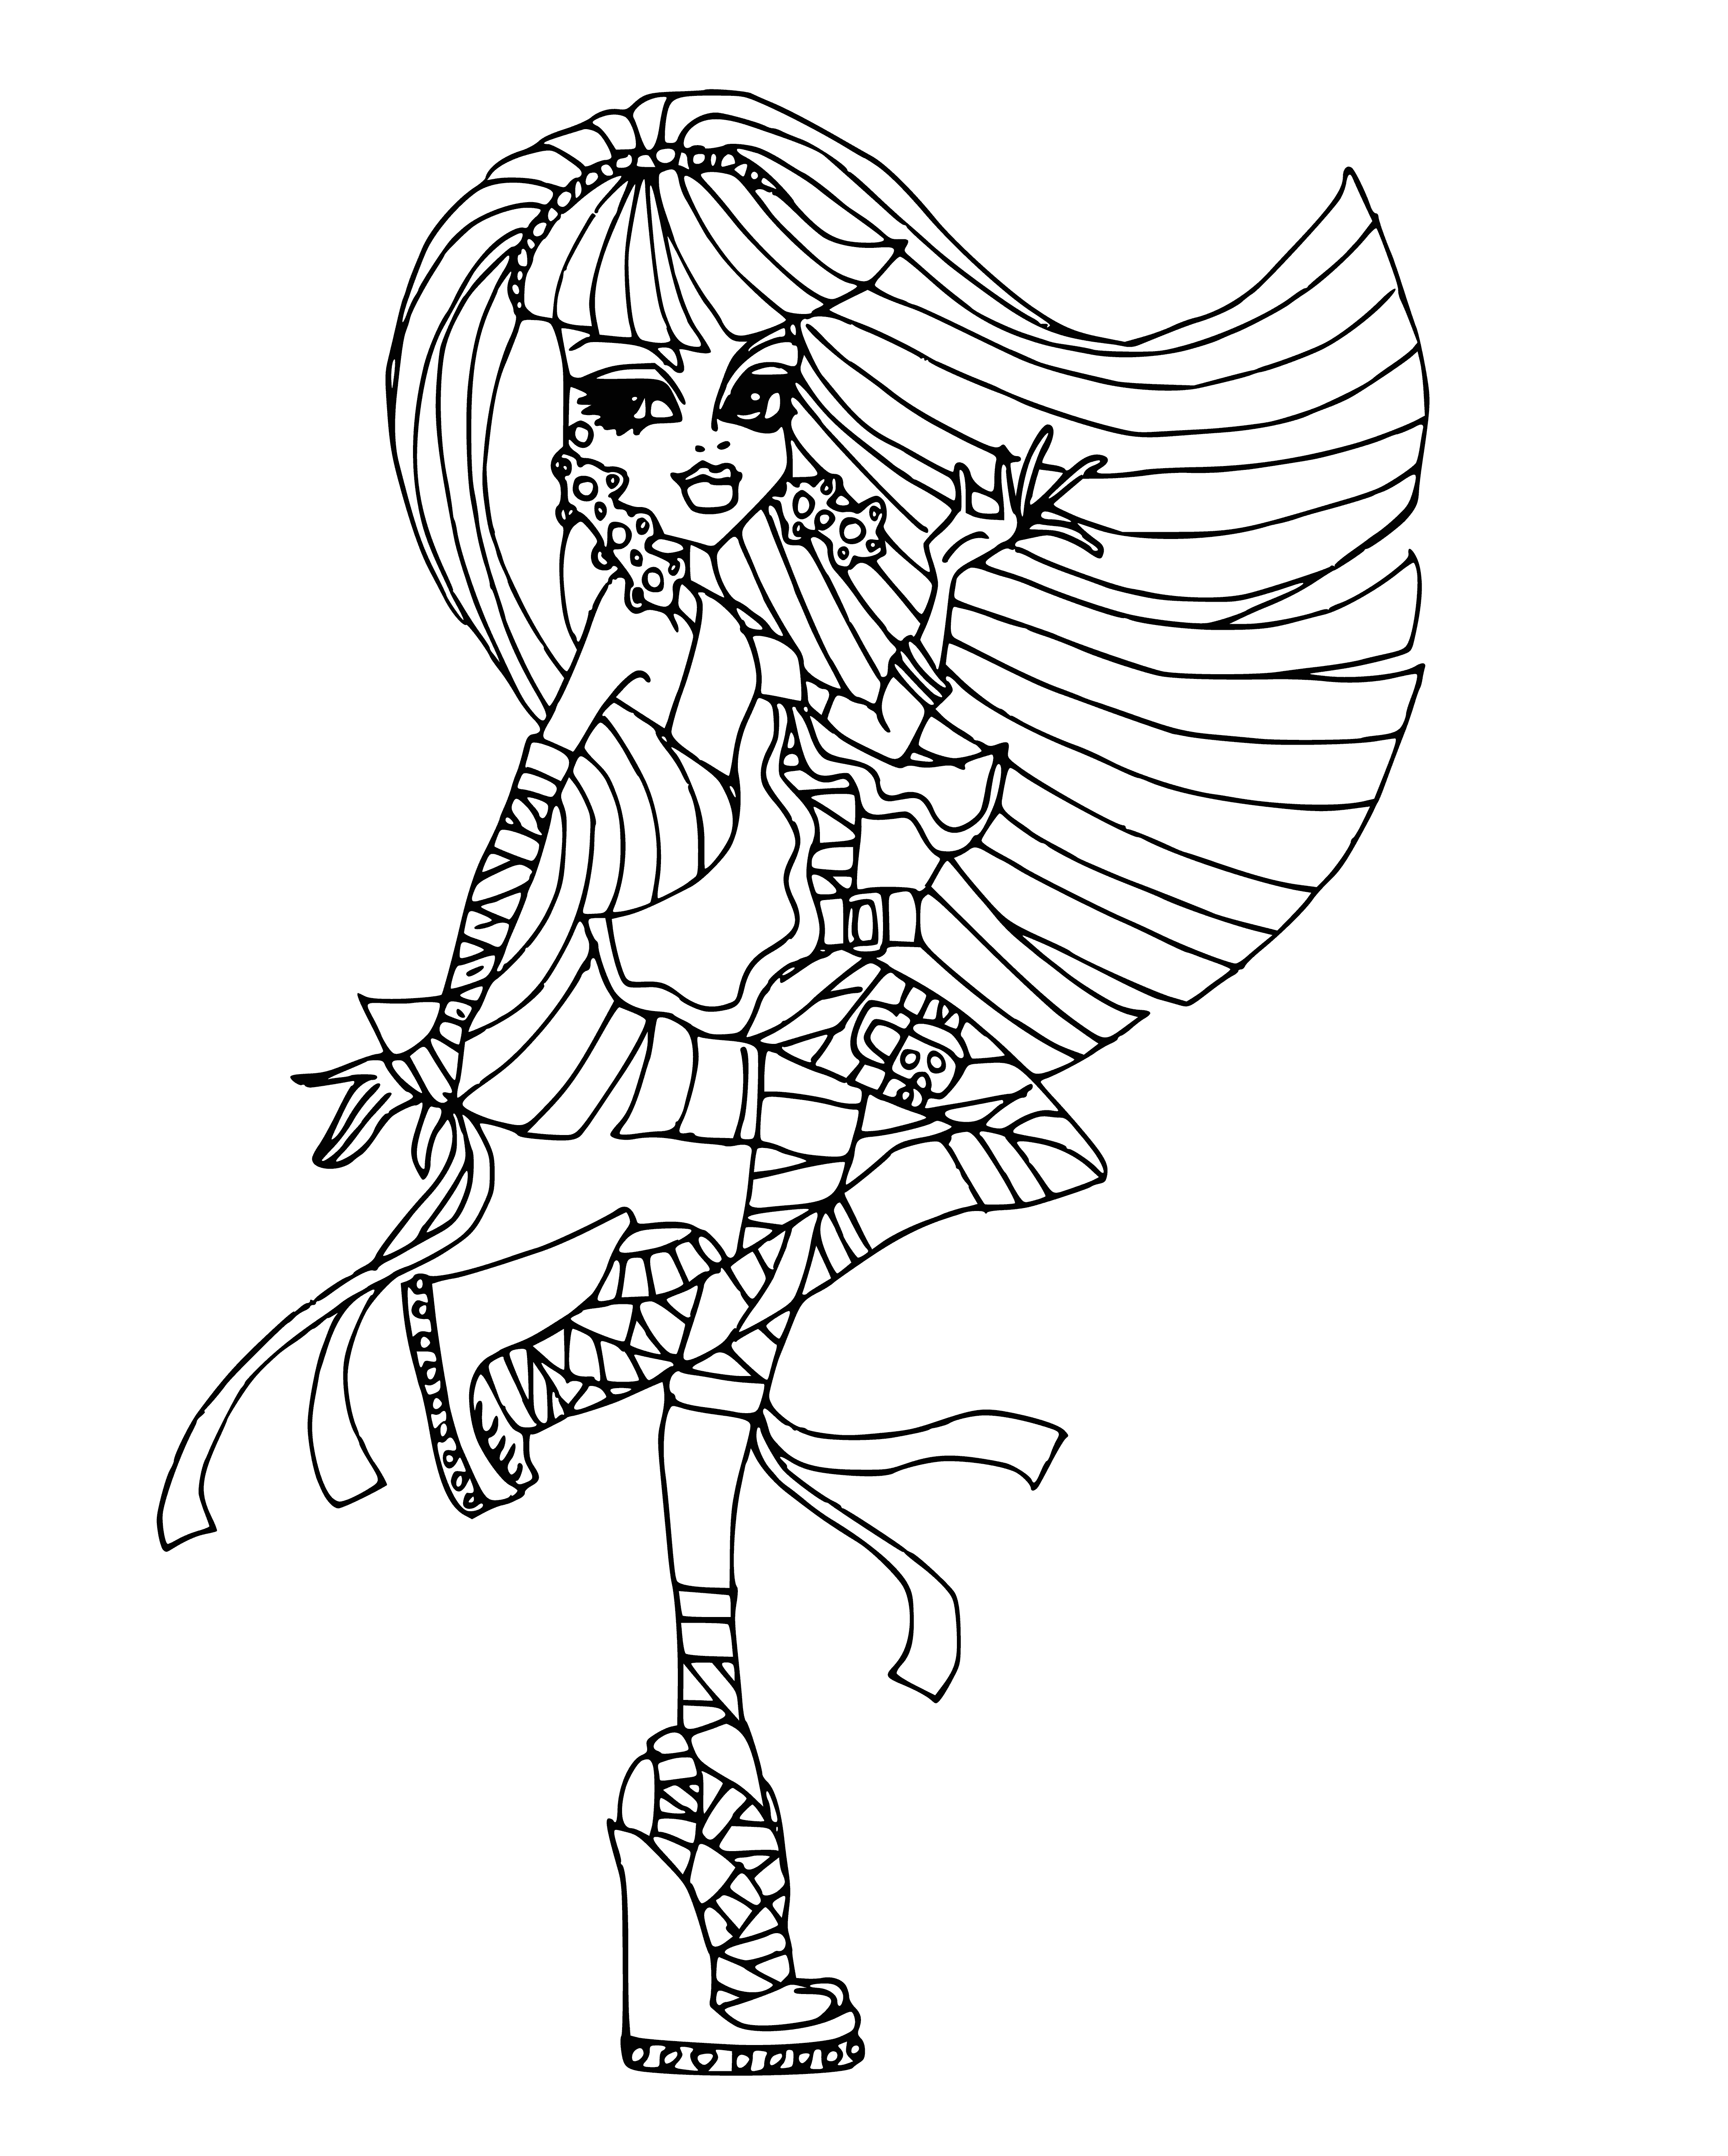 coloring page: Cleo de Nile is a 6,000 y/o Mummy Princess of Egypt. Regal & powerful, she wears elaborate jewelry & has sleek, dark hair. She's a respected Monster High student seeking self-improvement.